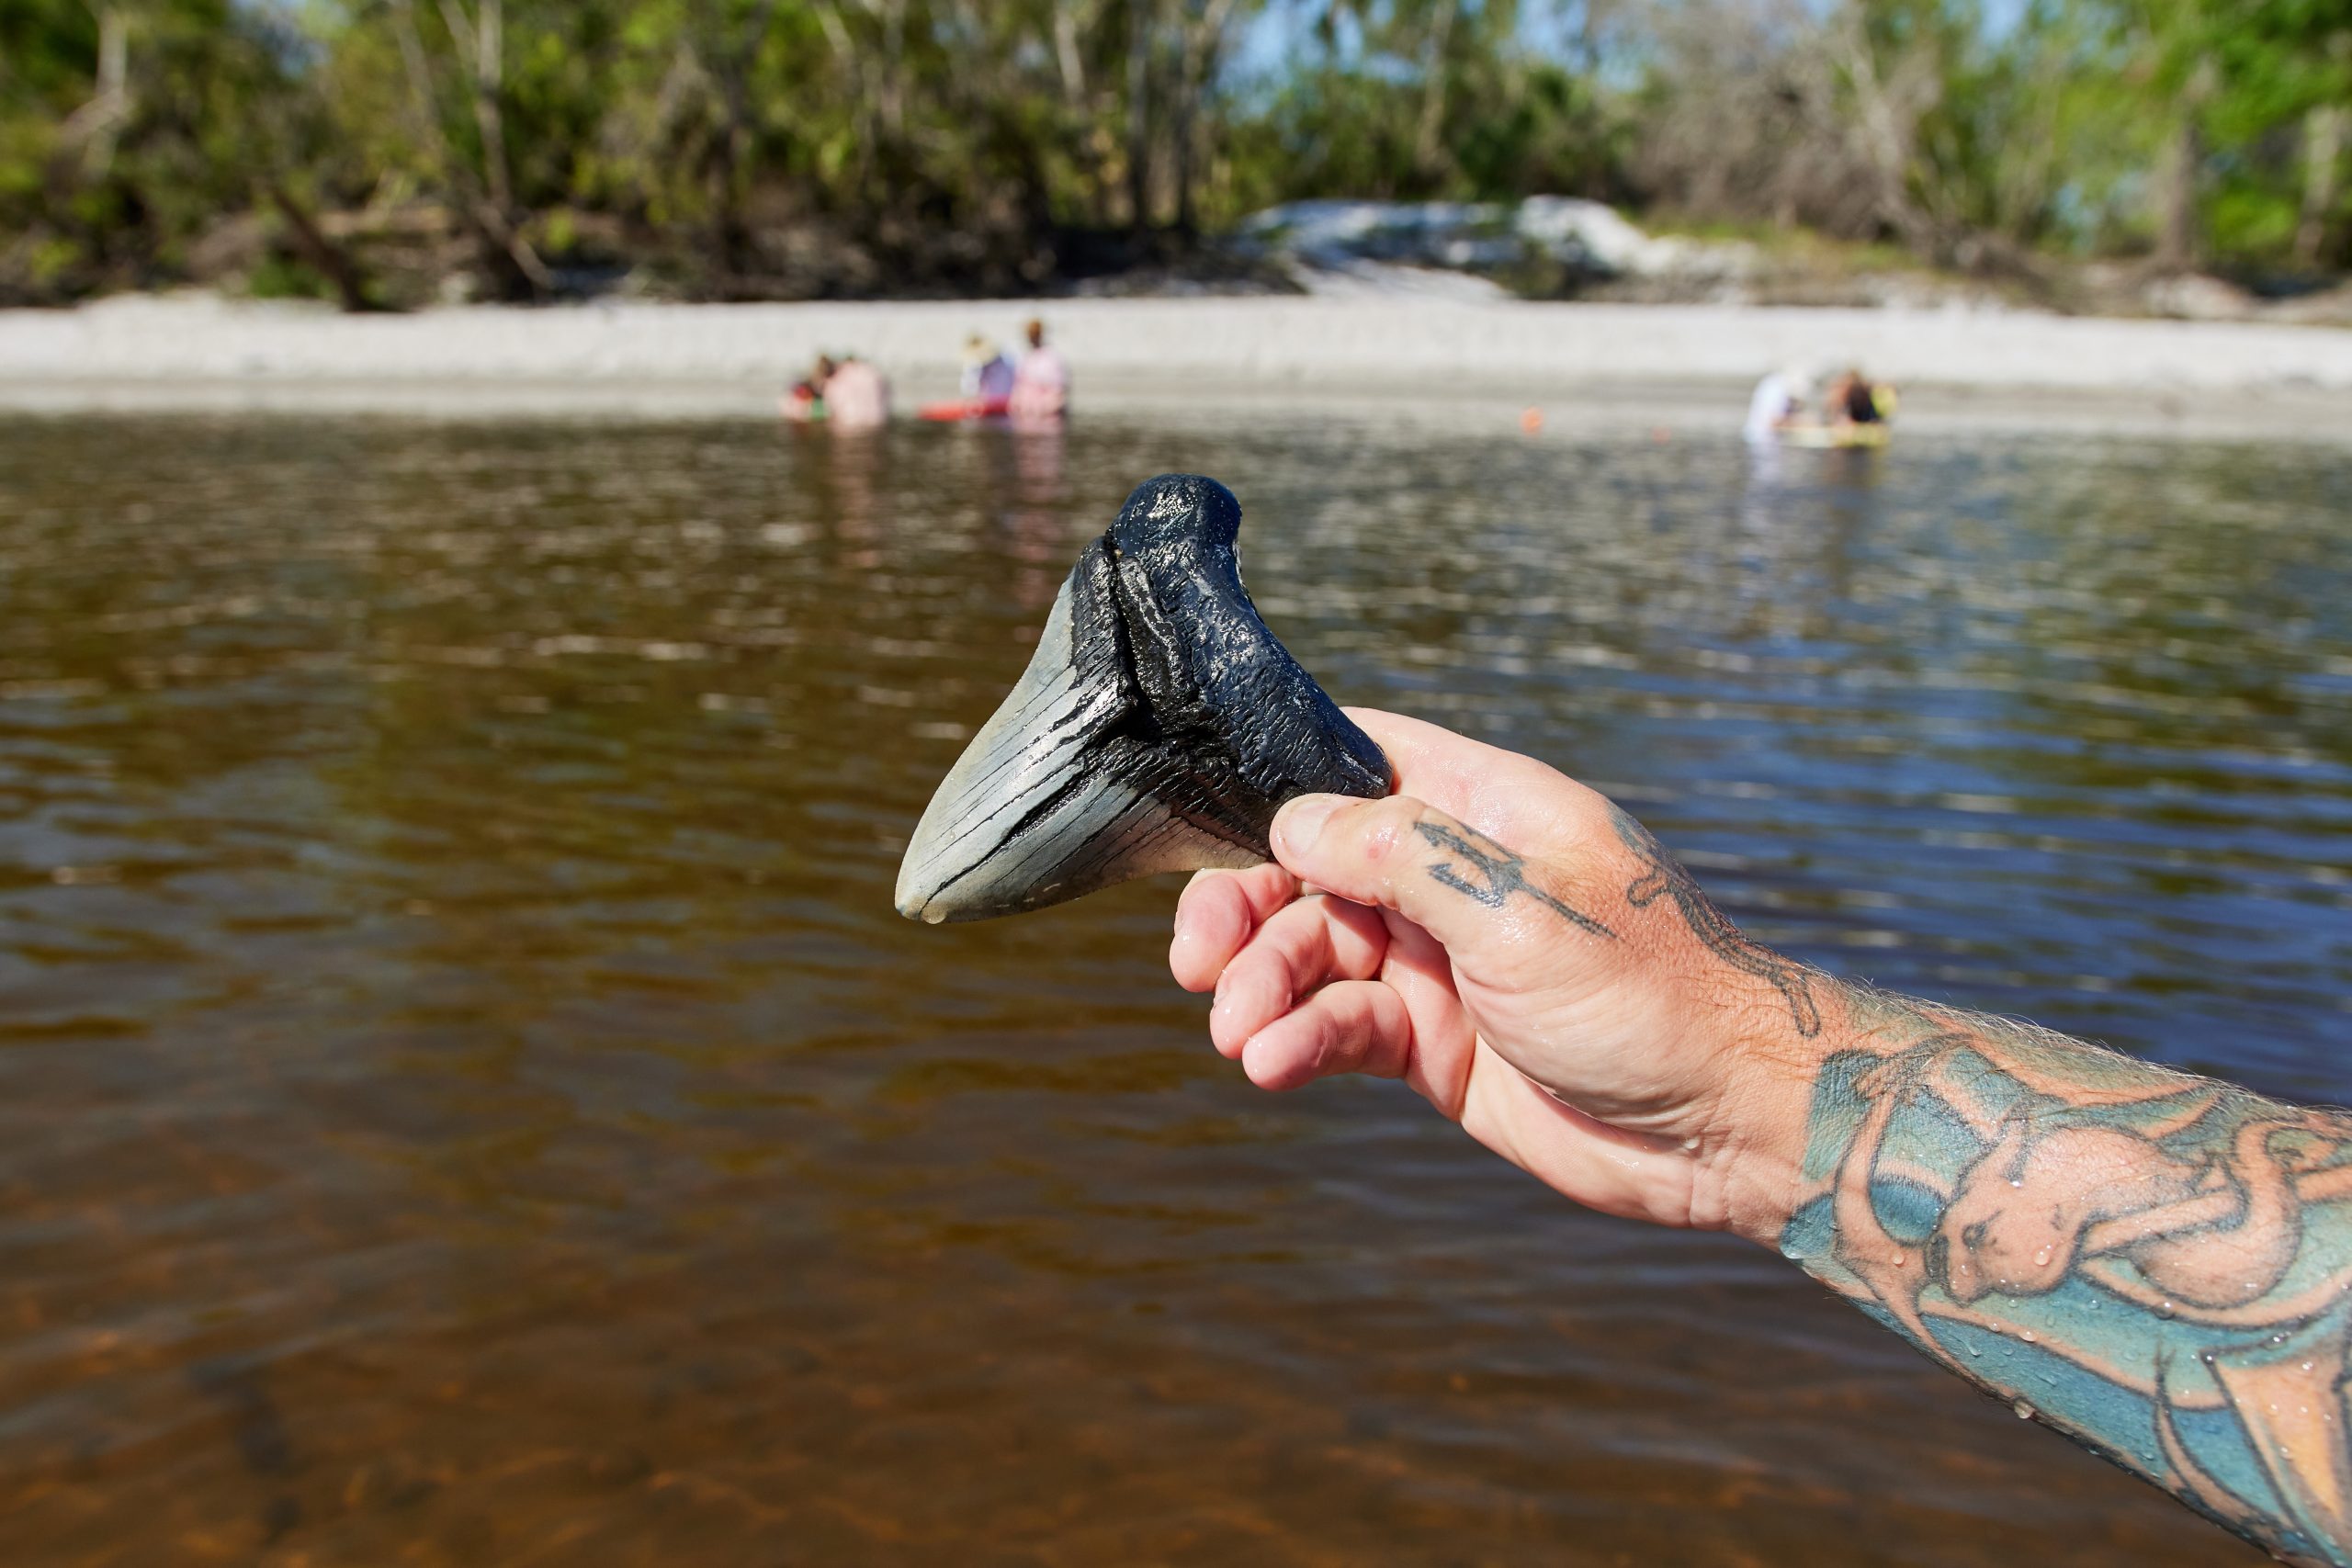 Florida Fossil Hunting Etiquette: Searching Responsibly